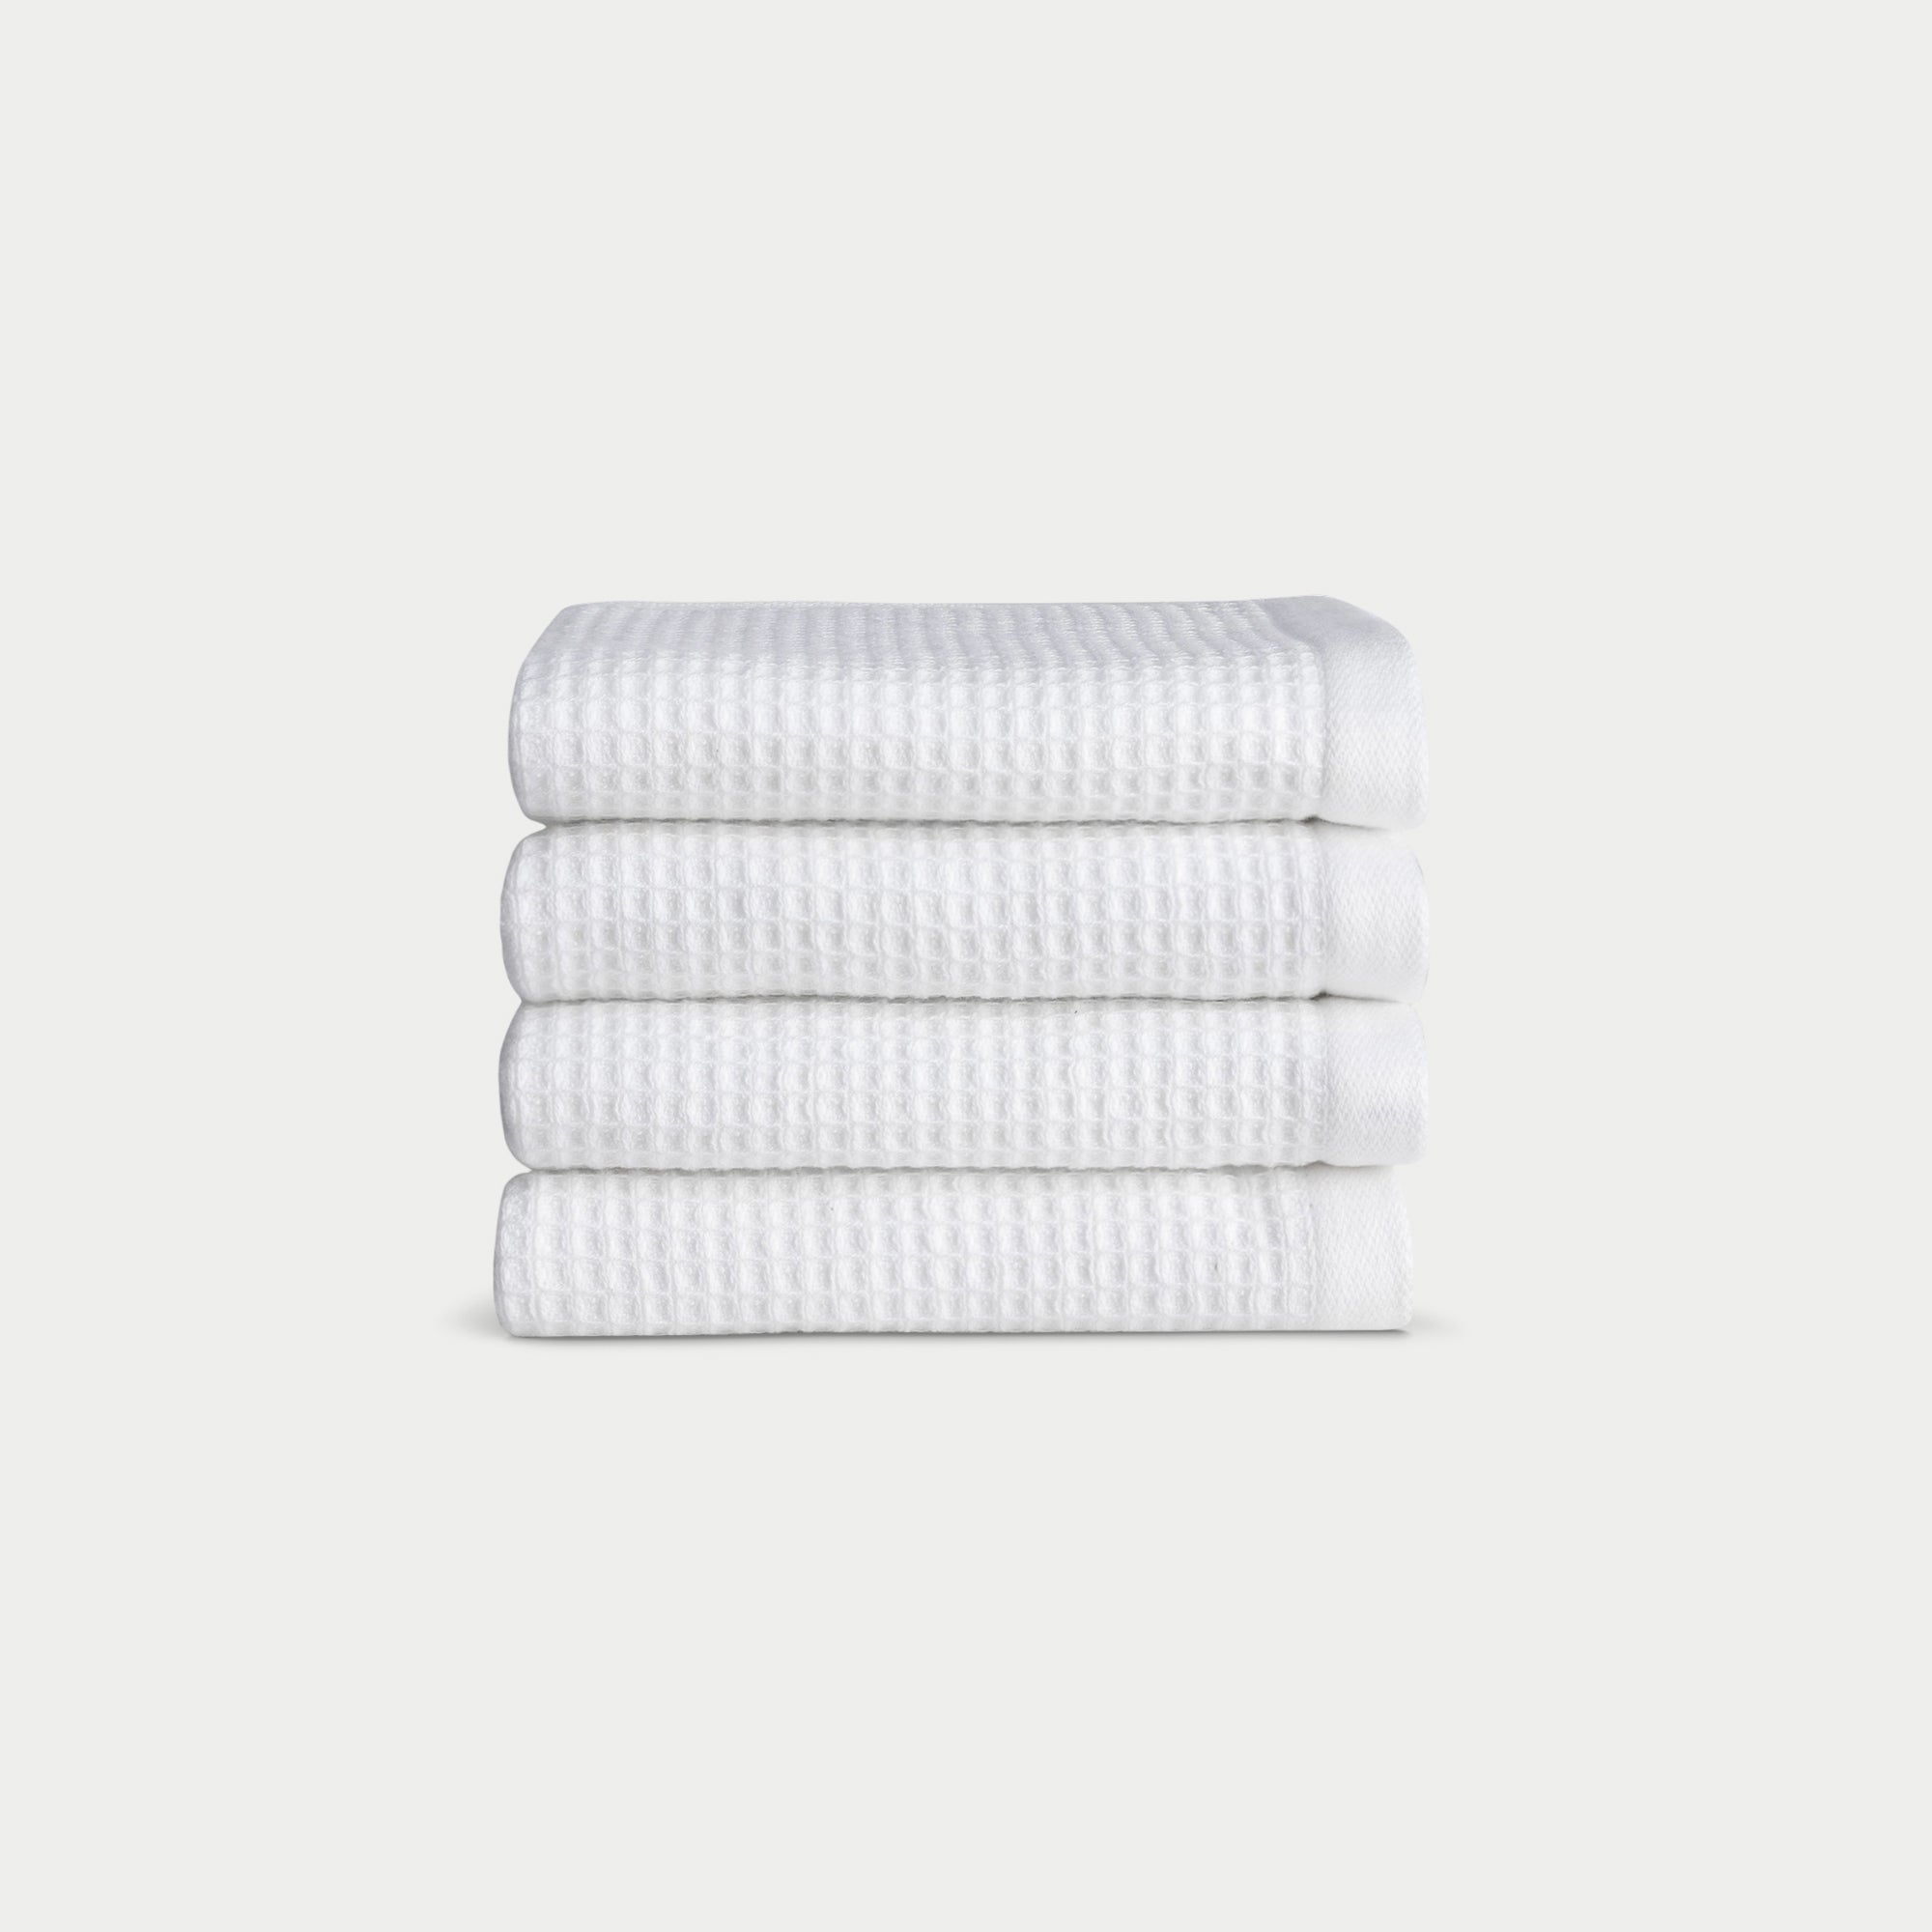 White Waffle Wash Cloths neatly folded. The photo was taken with a white background. |Color:White